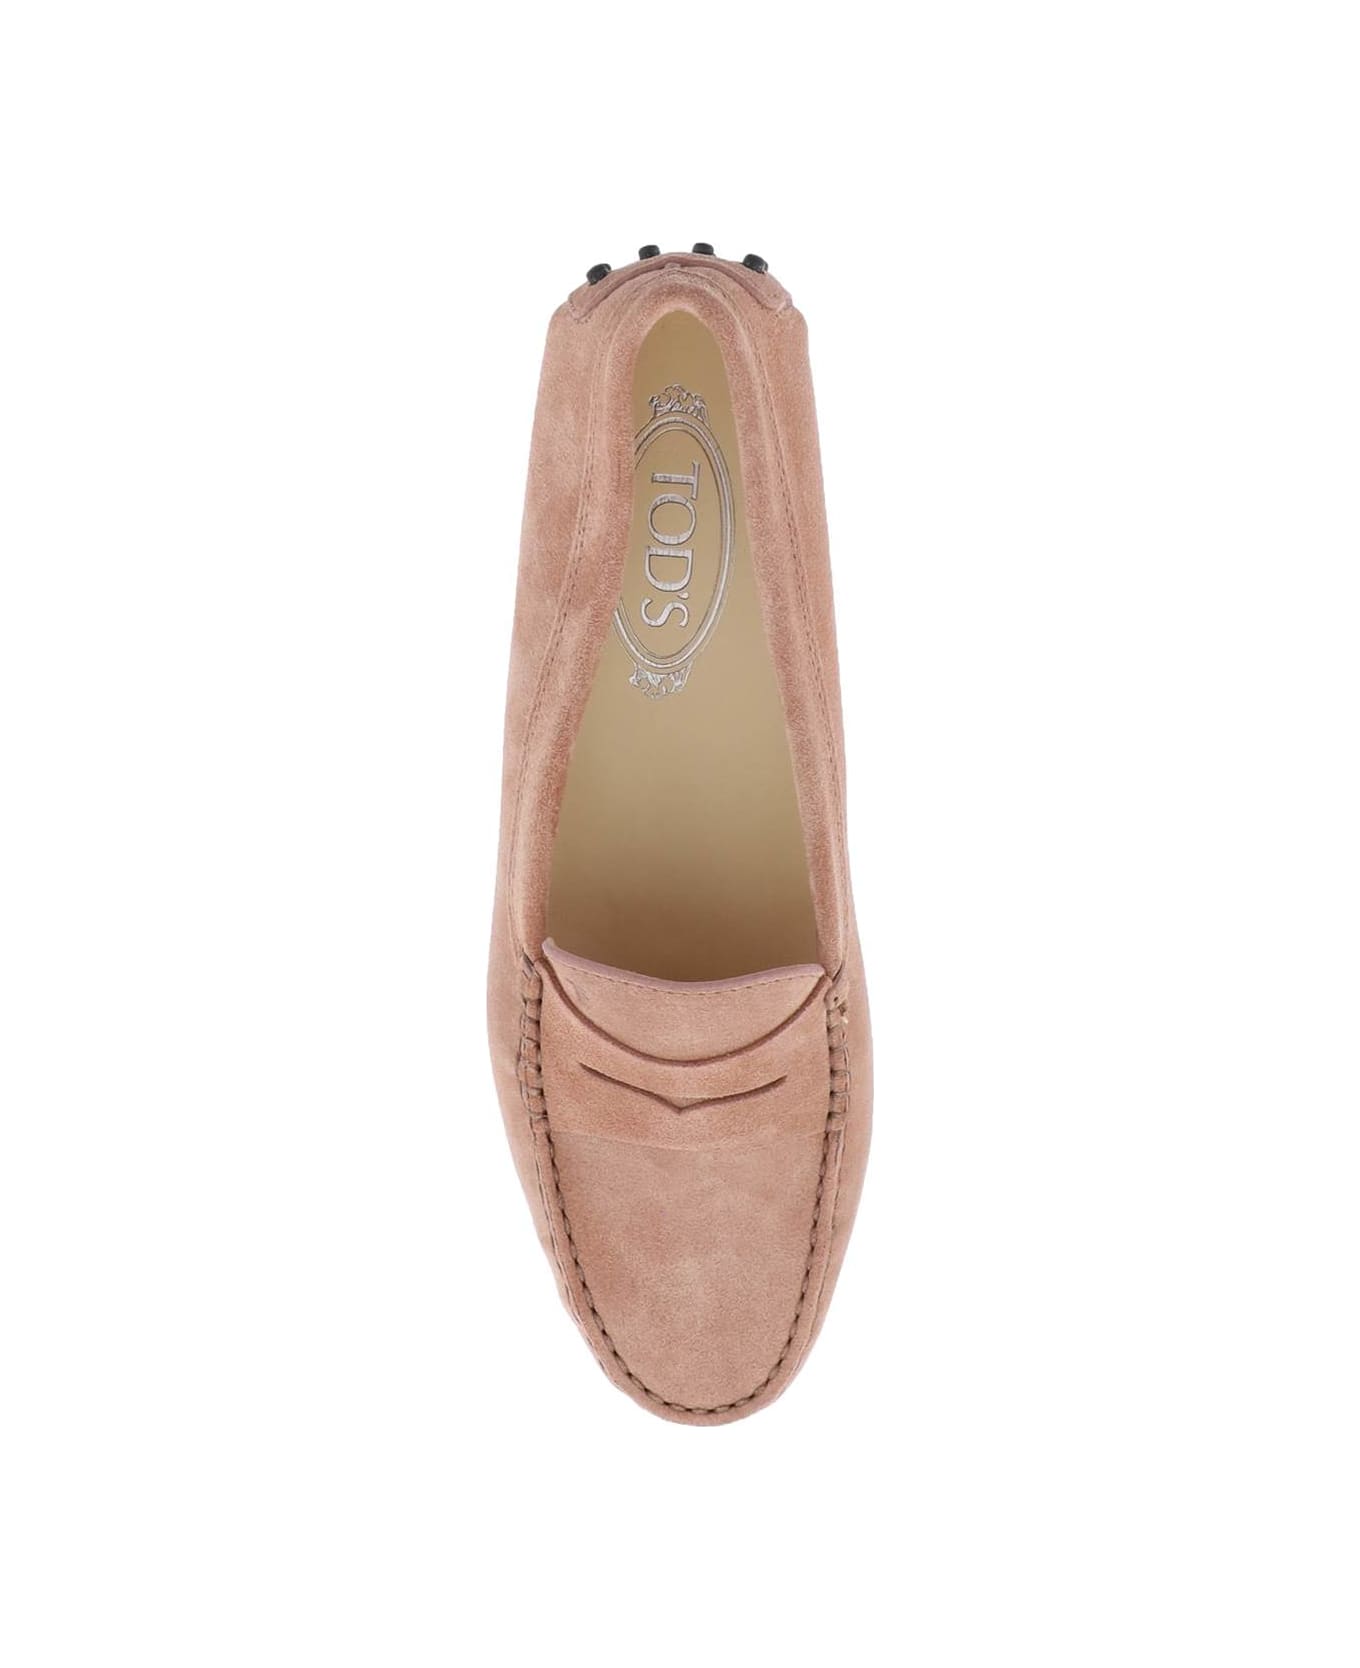 Tod's Gommino Loafers - COTTO CHIARO (Pink) フラットシューズ